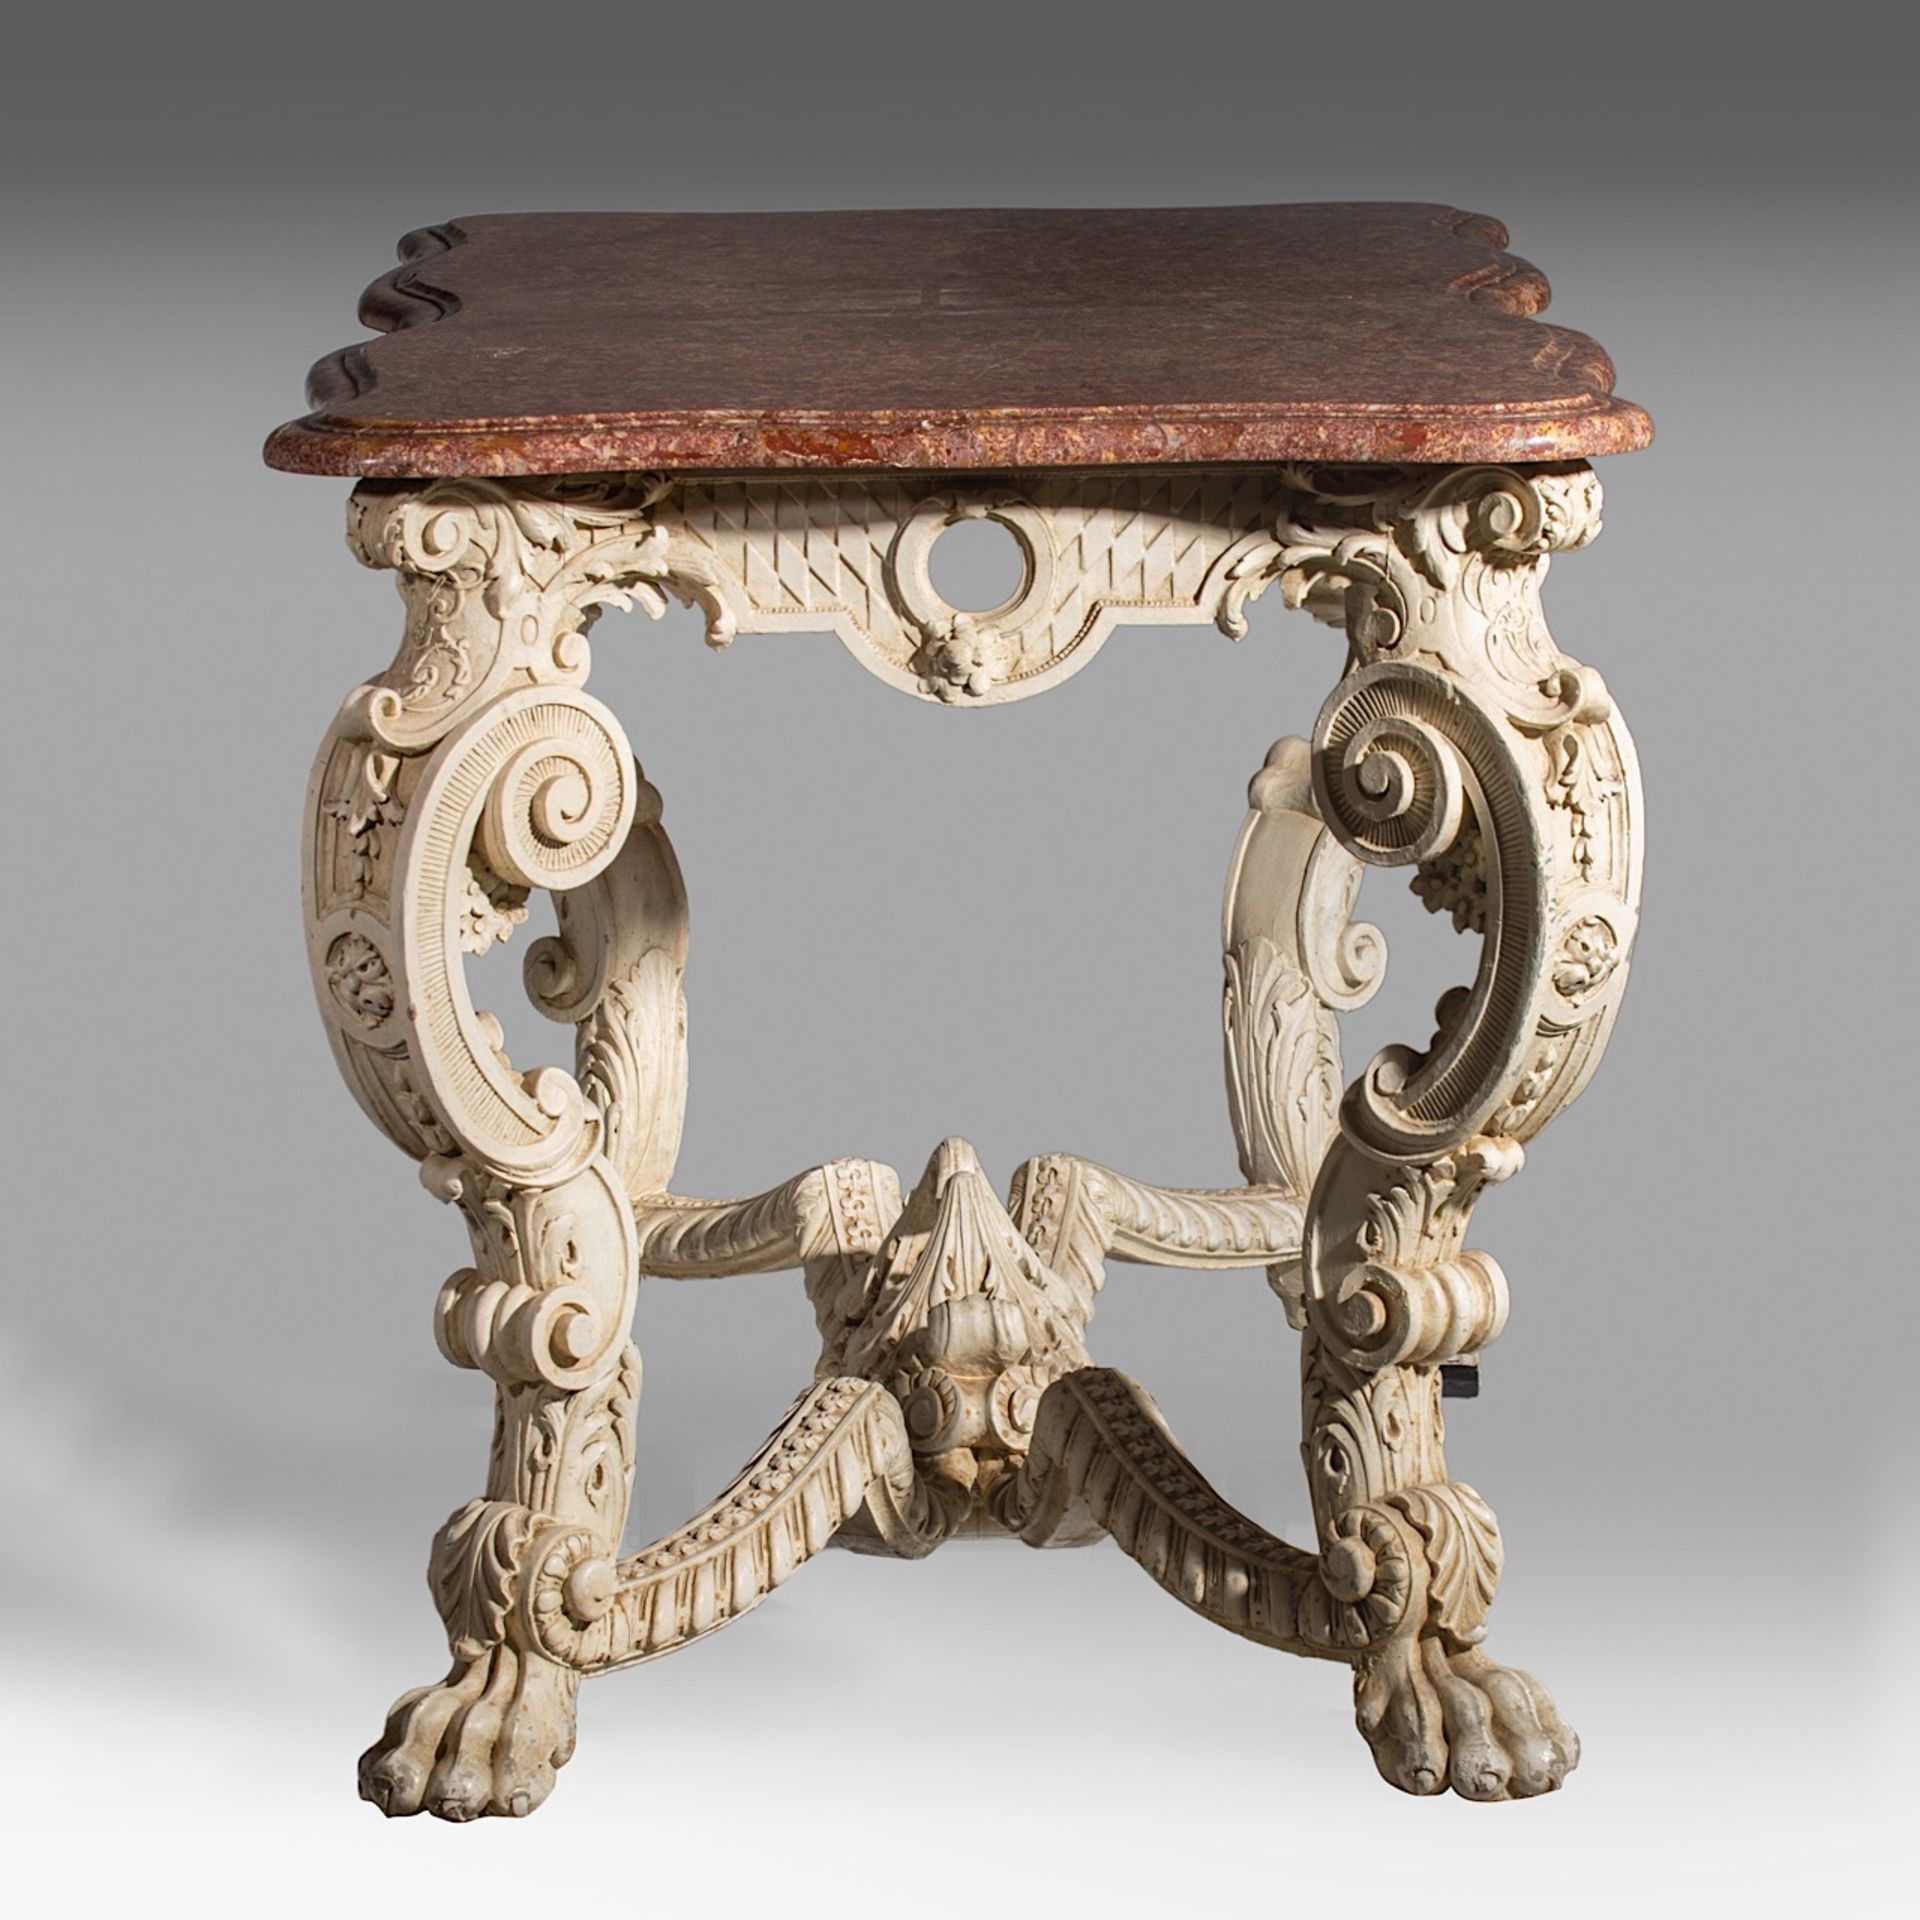 An imposing Louis XIV-style 'console de milieu' with a brocatelle marble, 19thC, H 81,5 - W 147 - D - Image 5 of 11